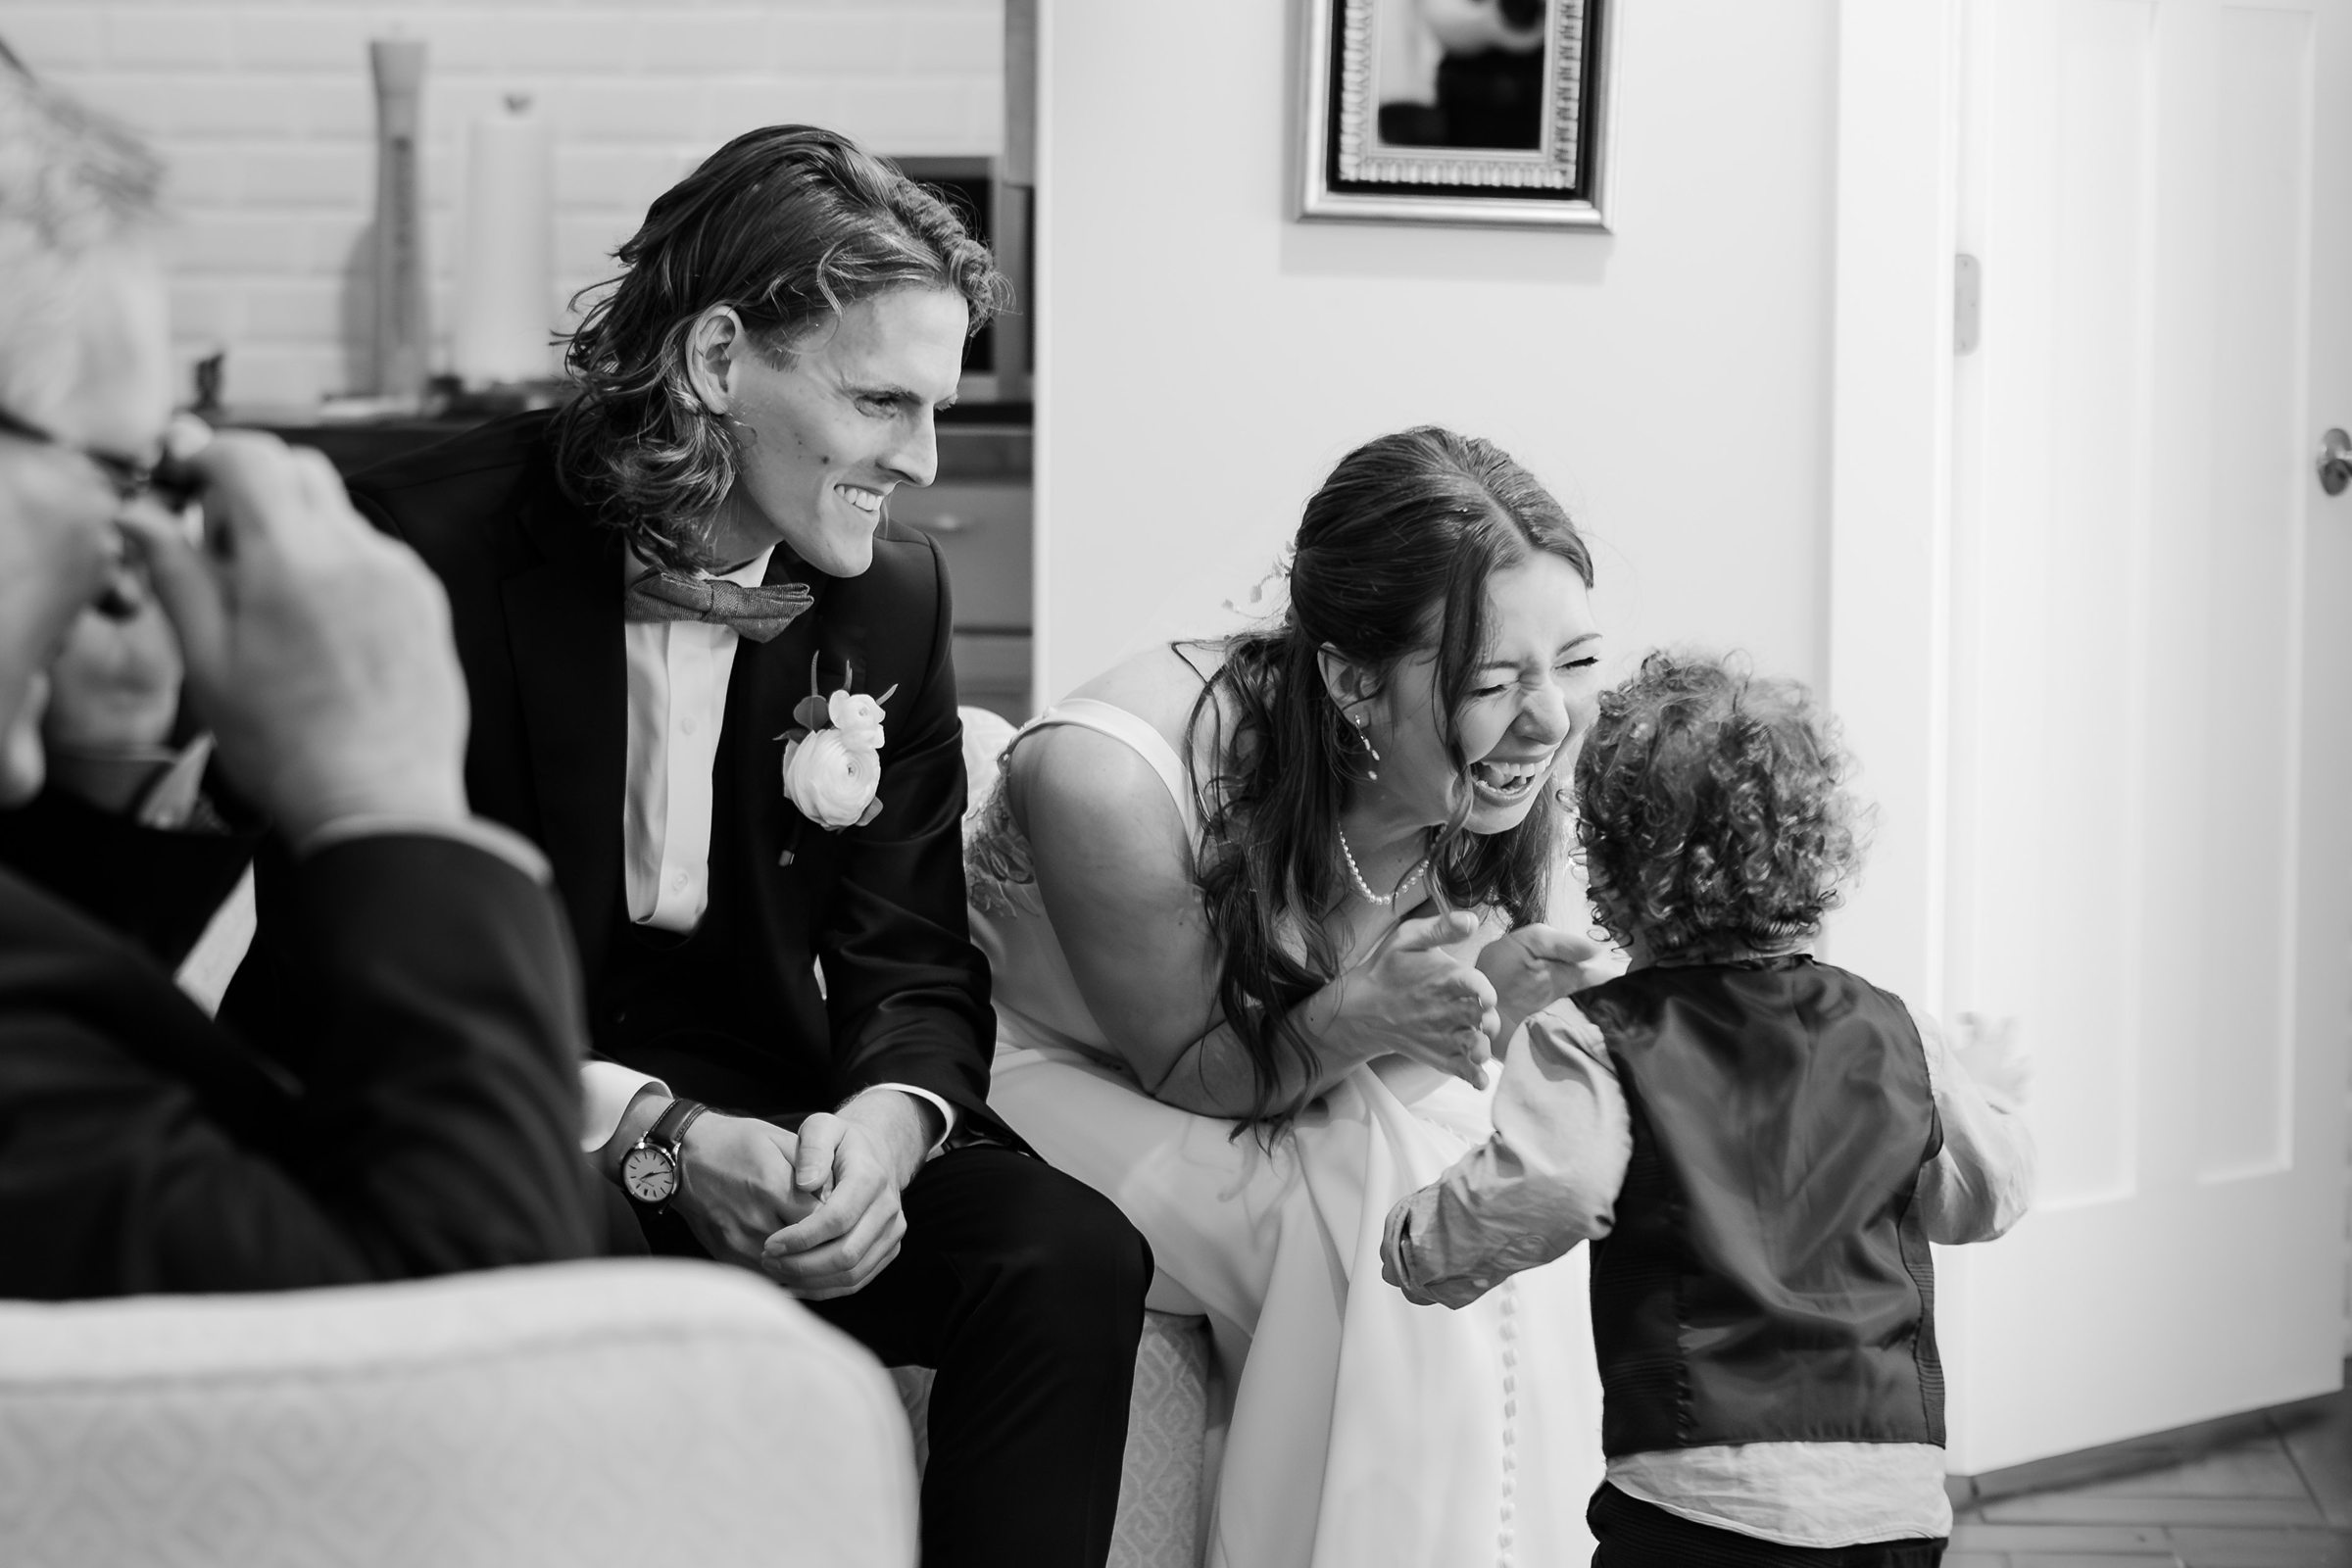 A bride laughs joyfully while interacting with a small child. The groom, seated beside her, smiles and watches. They are in an indoor setting with a mirror and door in the background.